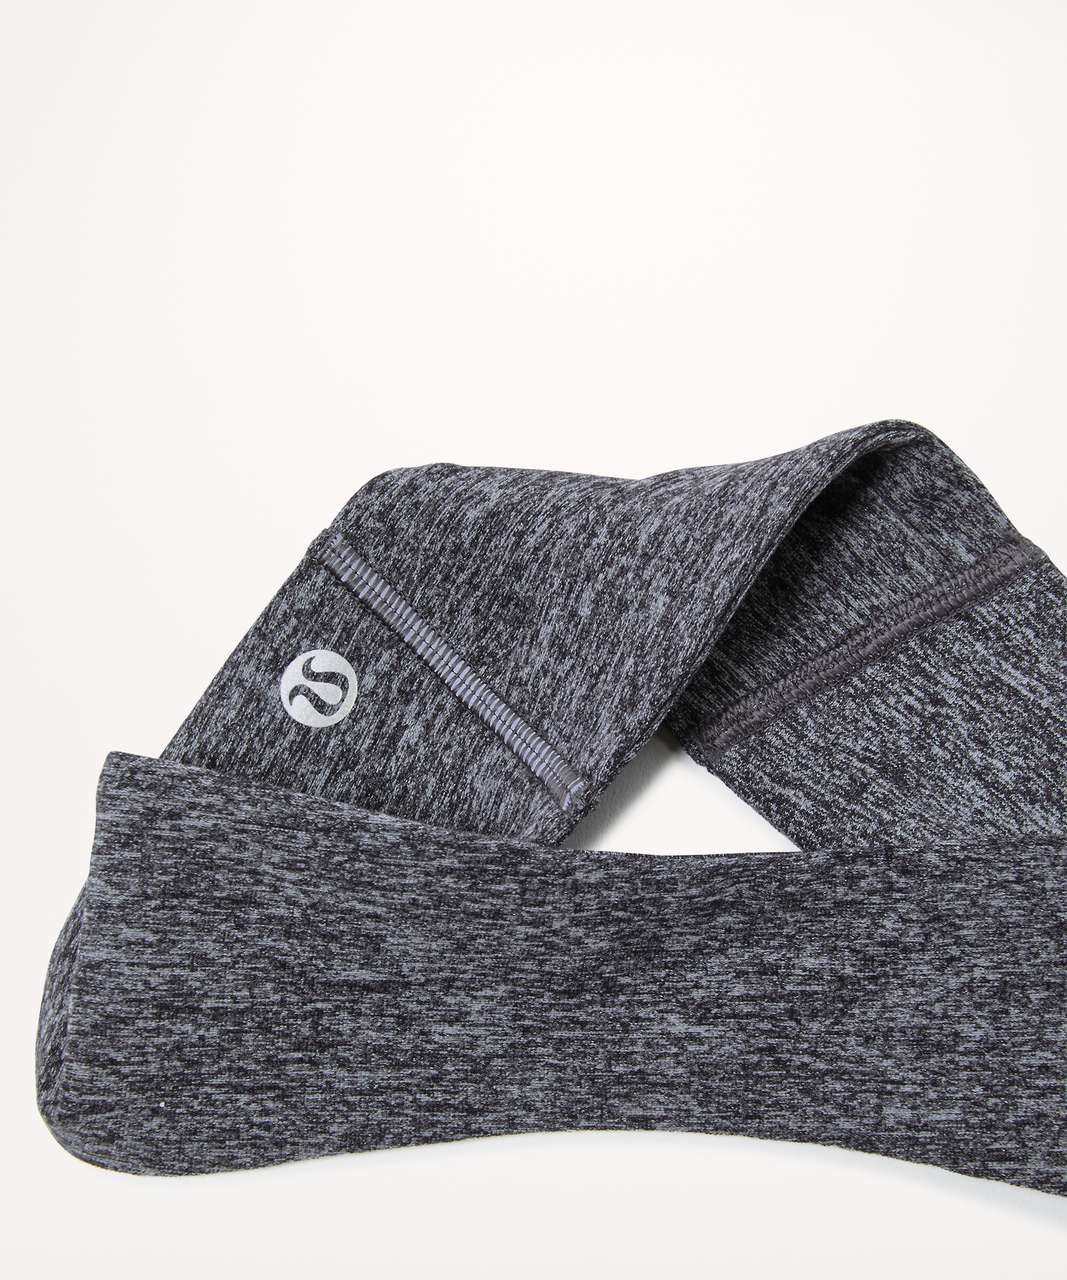 Lululemon Run It Out Ear Warmer (Special Edition) - Reconnect Heathered Black Silver Reflective